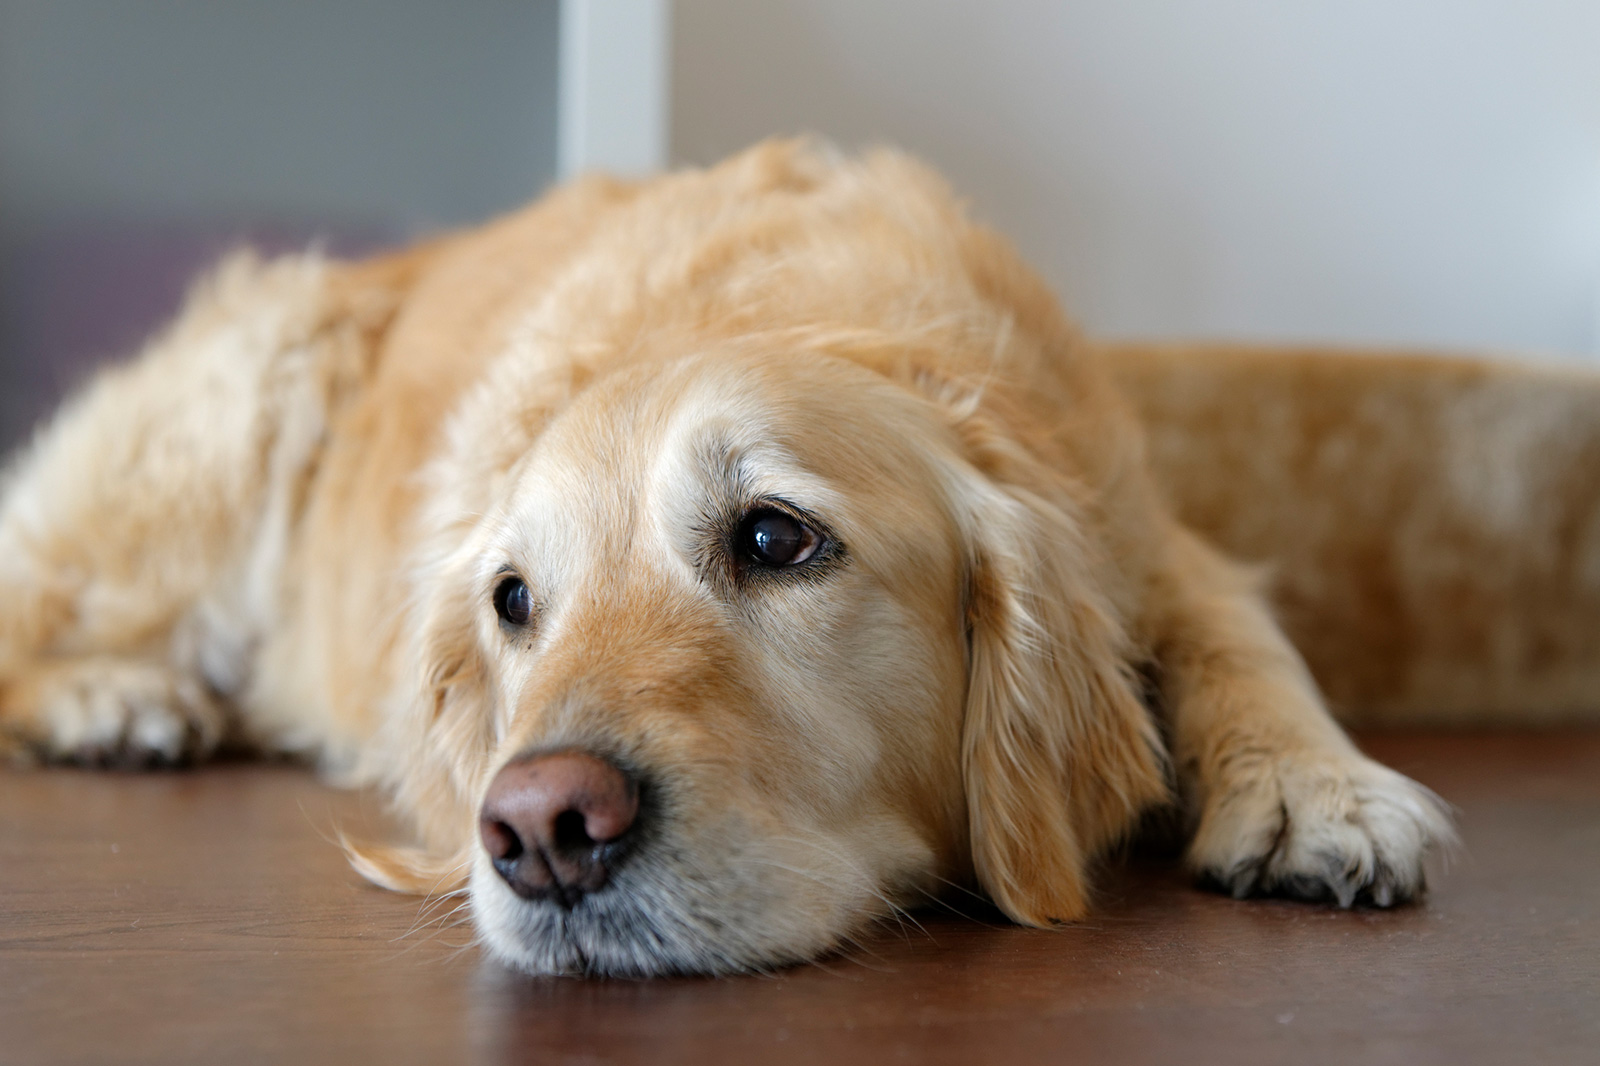 How will a dog act after a seizure?